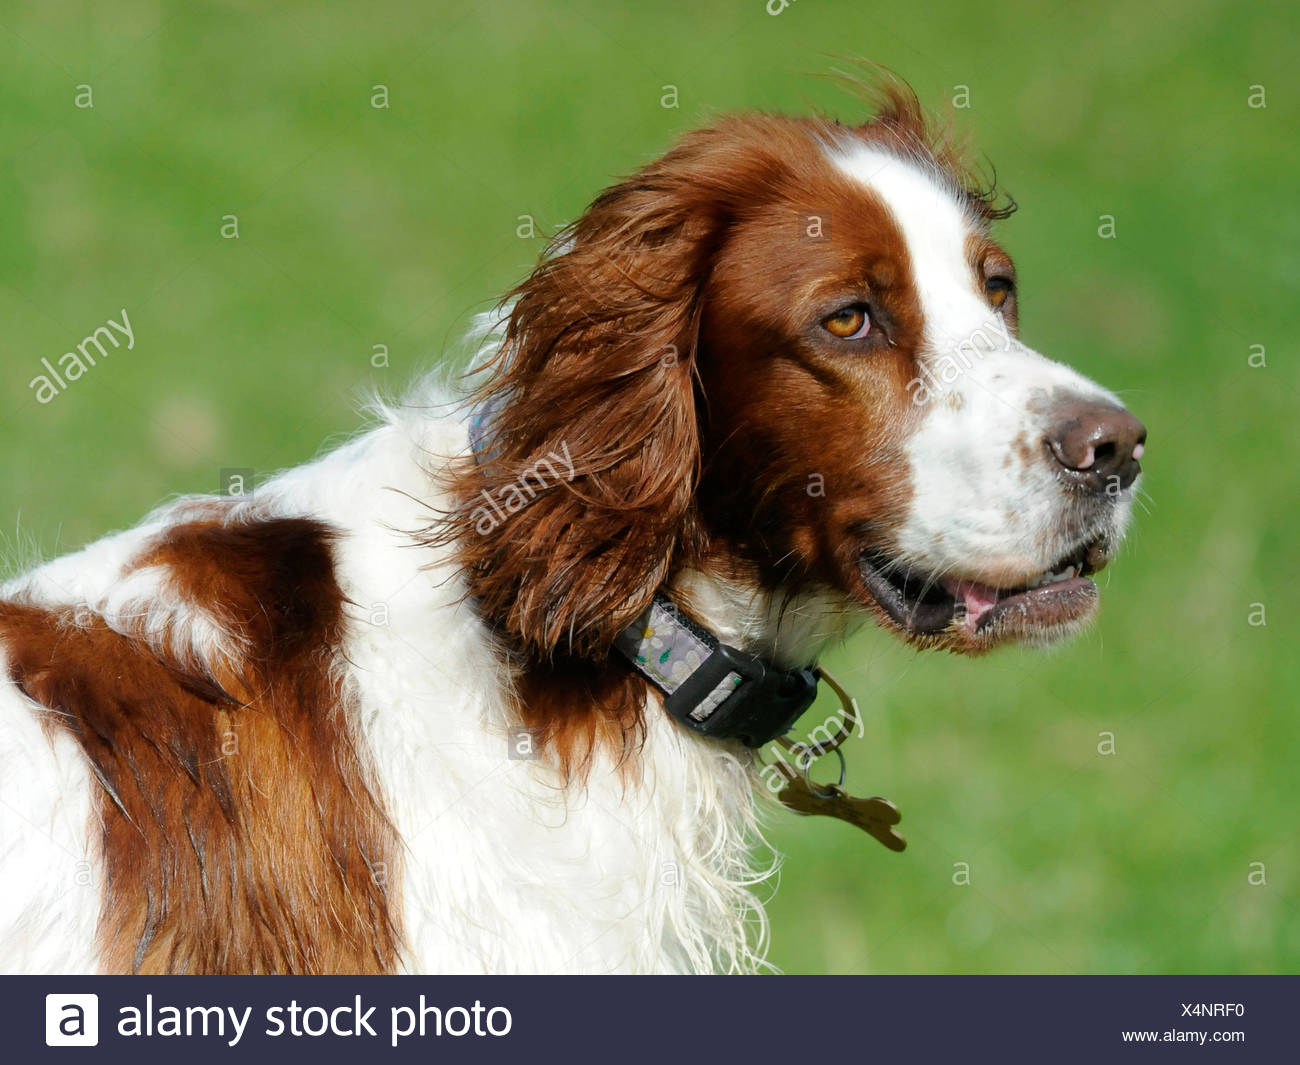 A Red And White English Setter Stock Photo 278303956 Alamy